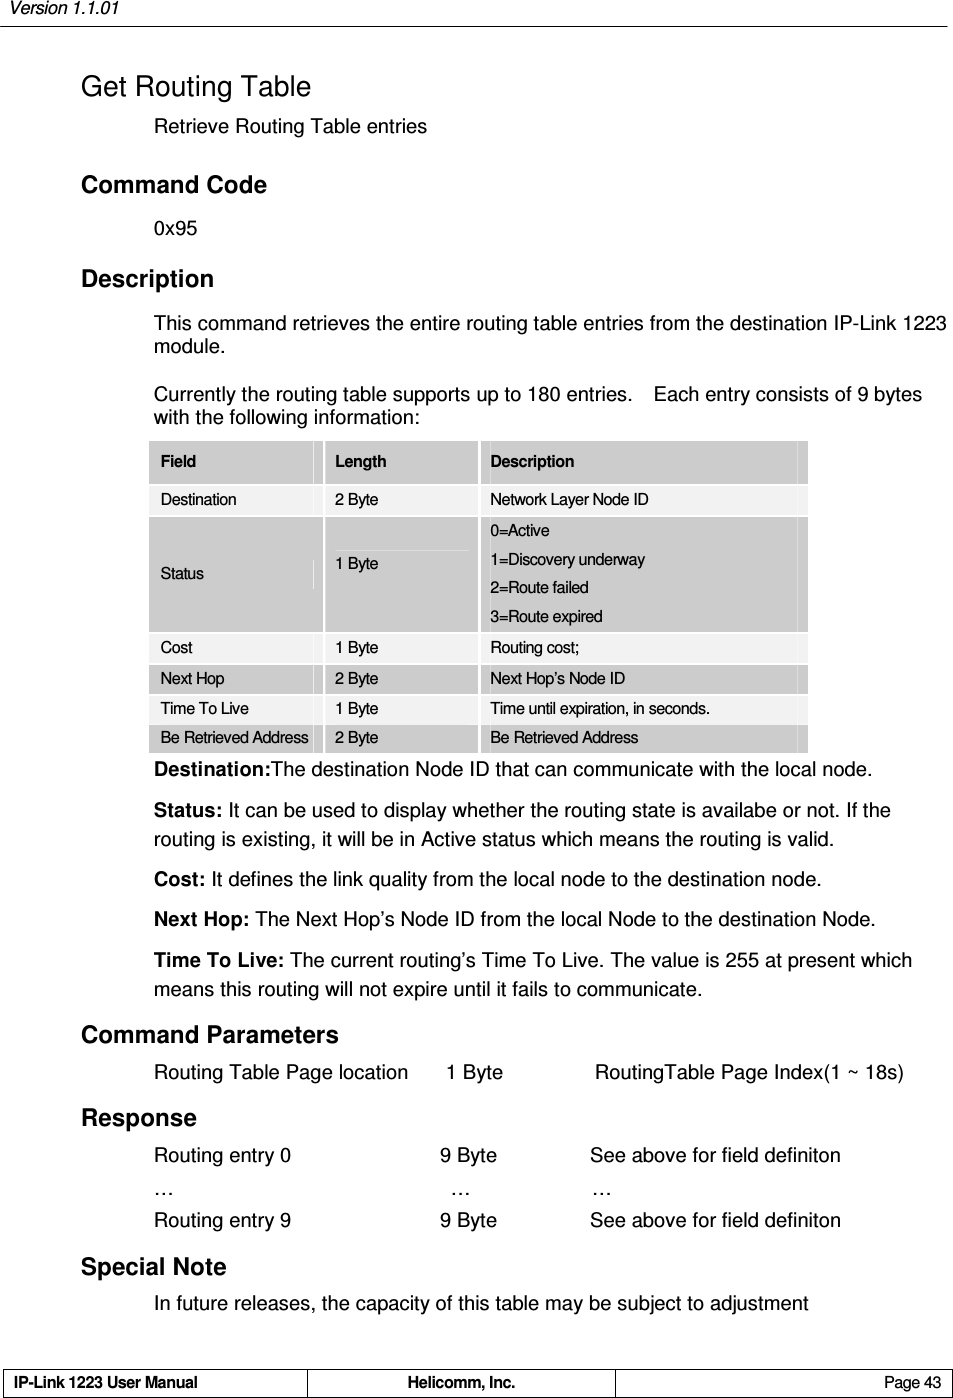 Version 1.1.01     IP-Link 1223 User Manual  Helicomm, Inc.  Page 43   Get Routing Table Retrieve Routing Table entries Command Code 0x95 Description This command retrieves the entire routing table entries from the destination IP-Link 1223 module.     Currently the routing table supports up to 180 entries.    Each entry consists of 9 bytes with the following information: Field  Length  Description Destination    2 Byte  Network Layer Node ID Status    1 Byte    0=Active 1=Discovery underway 2=Route failed 3=Route expired Cost  1 Byte  Routing cost;   Next Hop  2 Byte  Next Hop’s Node ID Time To Live  1 Byte  Time until expiration, in seconds. Be Retrieved Address 2 Byte  Be Retrieved Address Destination:The destination Node ID that can communicate with the local node.   Status: It can be used to display whether the routing state is availabe or not. If the routing is existing, it will be in Active status which means the routing is valid. Cost: It defines the link quality from the local node to the destination node.   Next Hop: The Next Hop’s Node ID from the local Node to the destination Node. Time To Live: The current routing’s Time To Live. The value is 255 at present which means this routing will not expire until it fails to communicate. Command Parameters Routing Table Page location       1 Byte                  RoutingTable Page Index(1 ~ 18s) Response Routing entry 0        9 Byte                See above for field definiton …          …    … Routing entry 9        9 Byte                  See above for field definiton Special Note In future releases, the capacity of this table may be subject to adjustment 